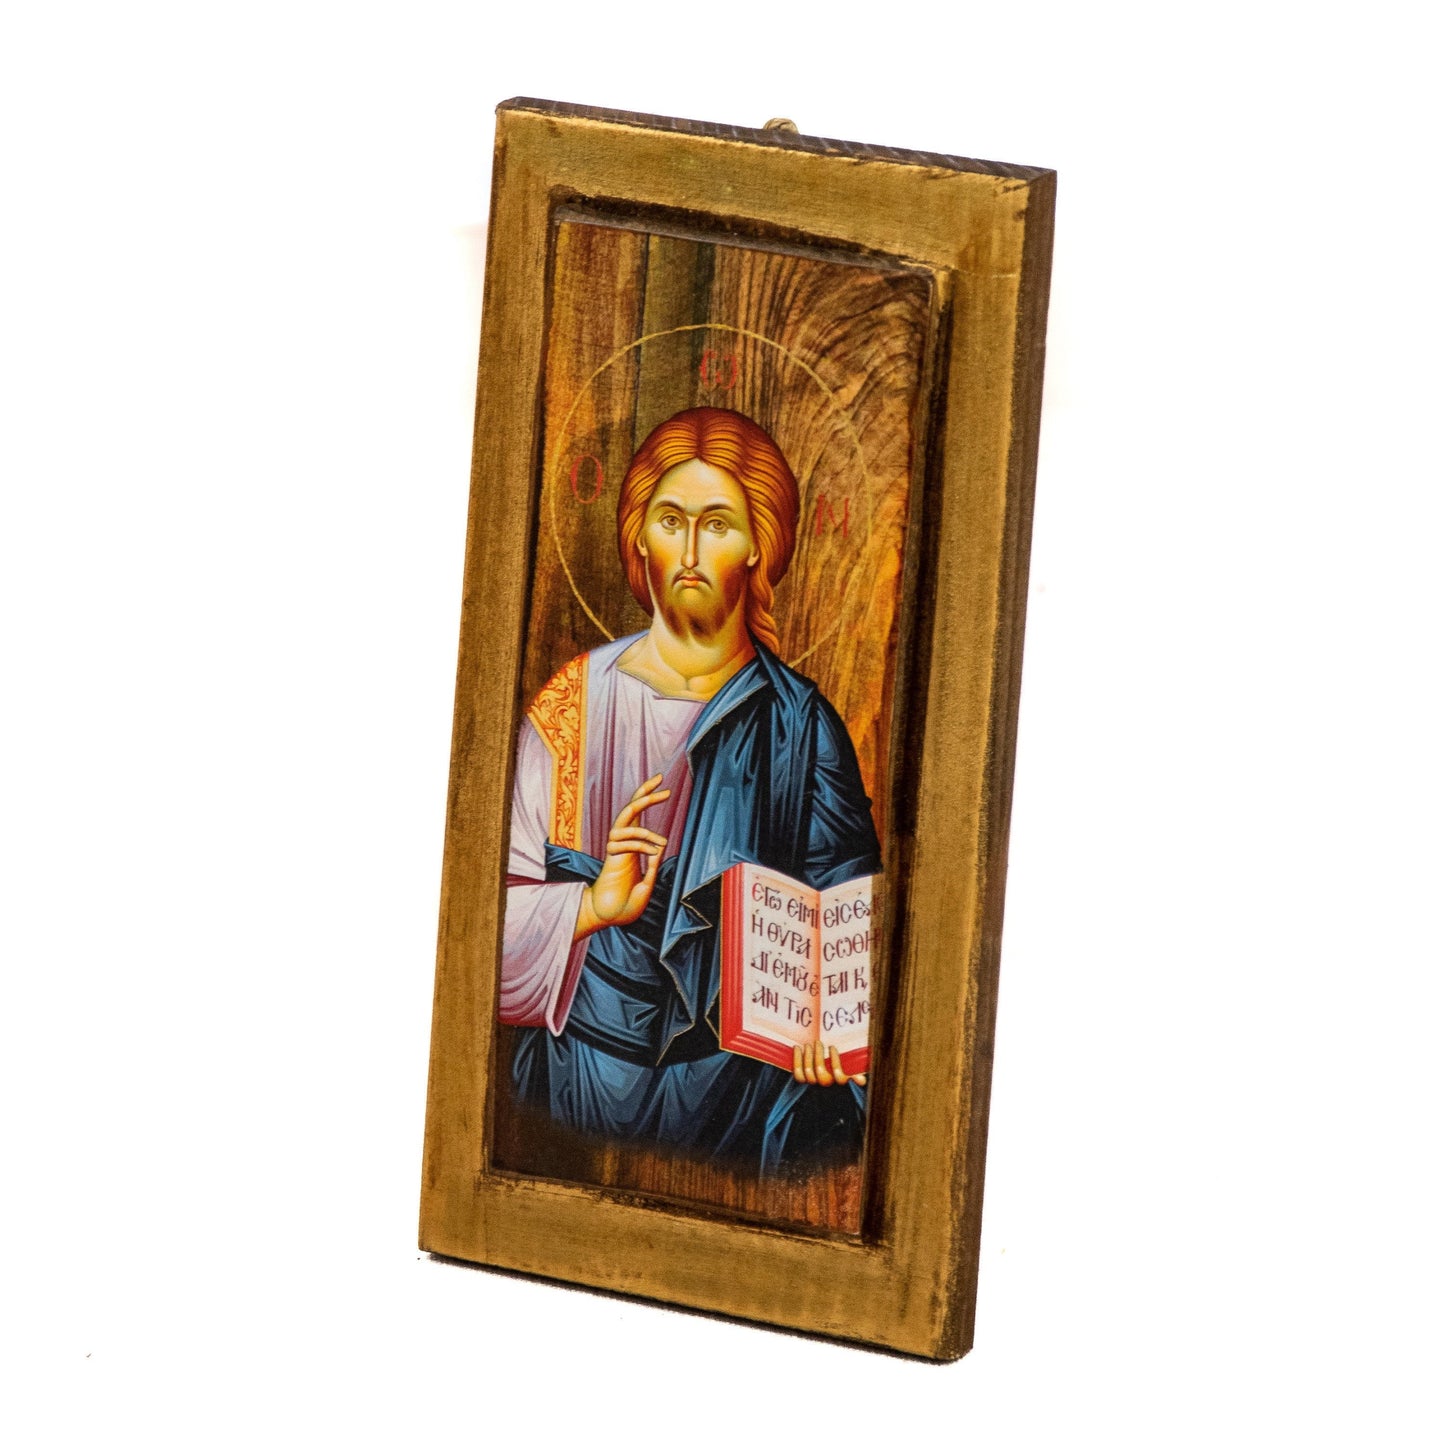 Jesus Christ icon, Handmade Greek Orthodox icon of our Lord, Byzantine art wall hanging wood plaque icon, wedding gift, religious decor TheHolyArt